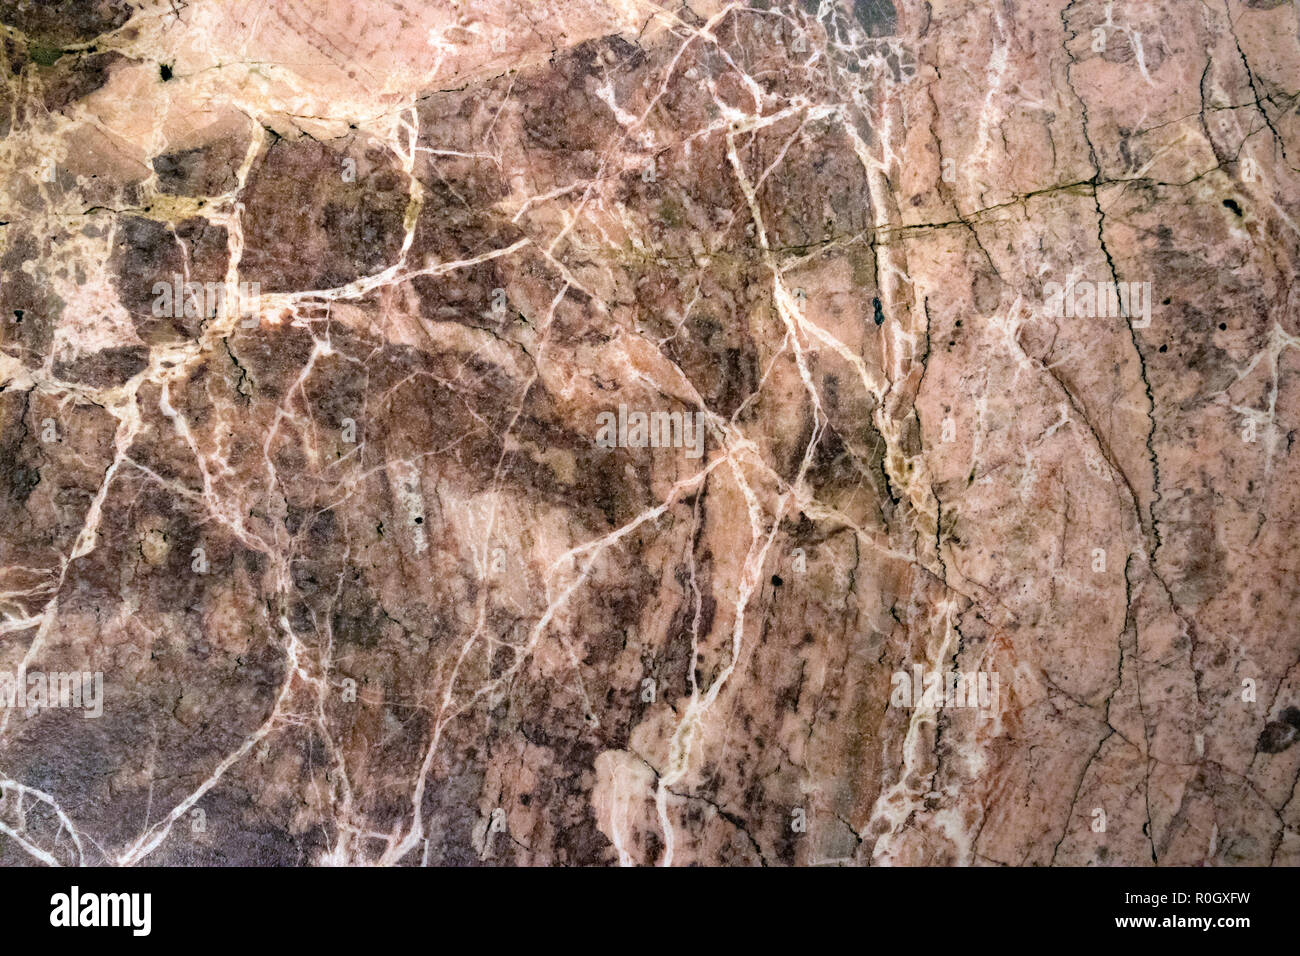 Multicolored layered marble texture with different veins and scratches, may be used as background Stock Photo